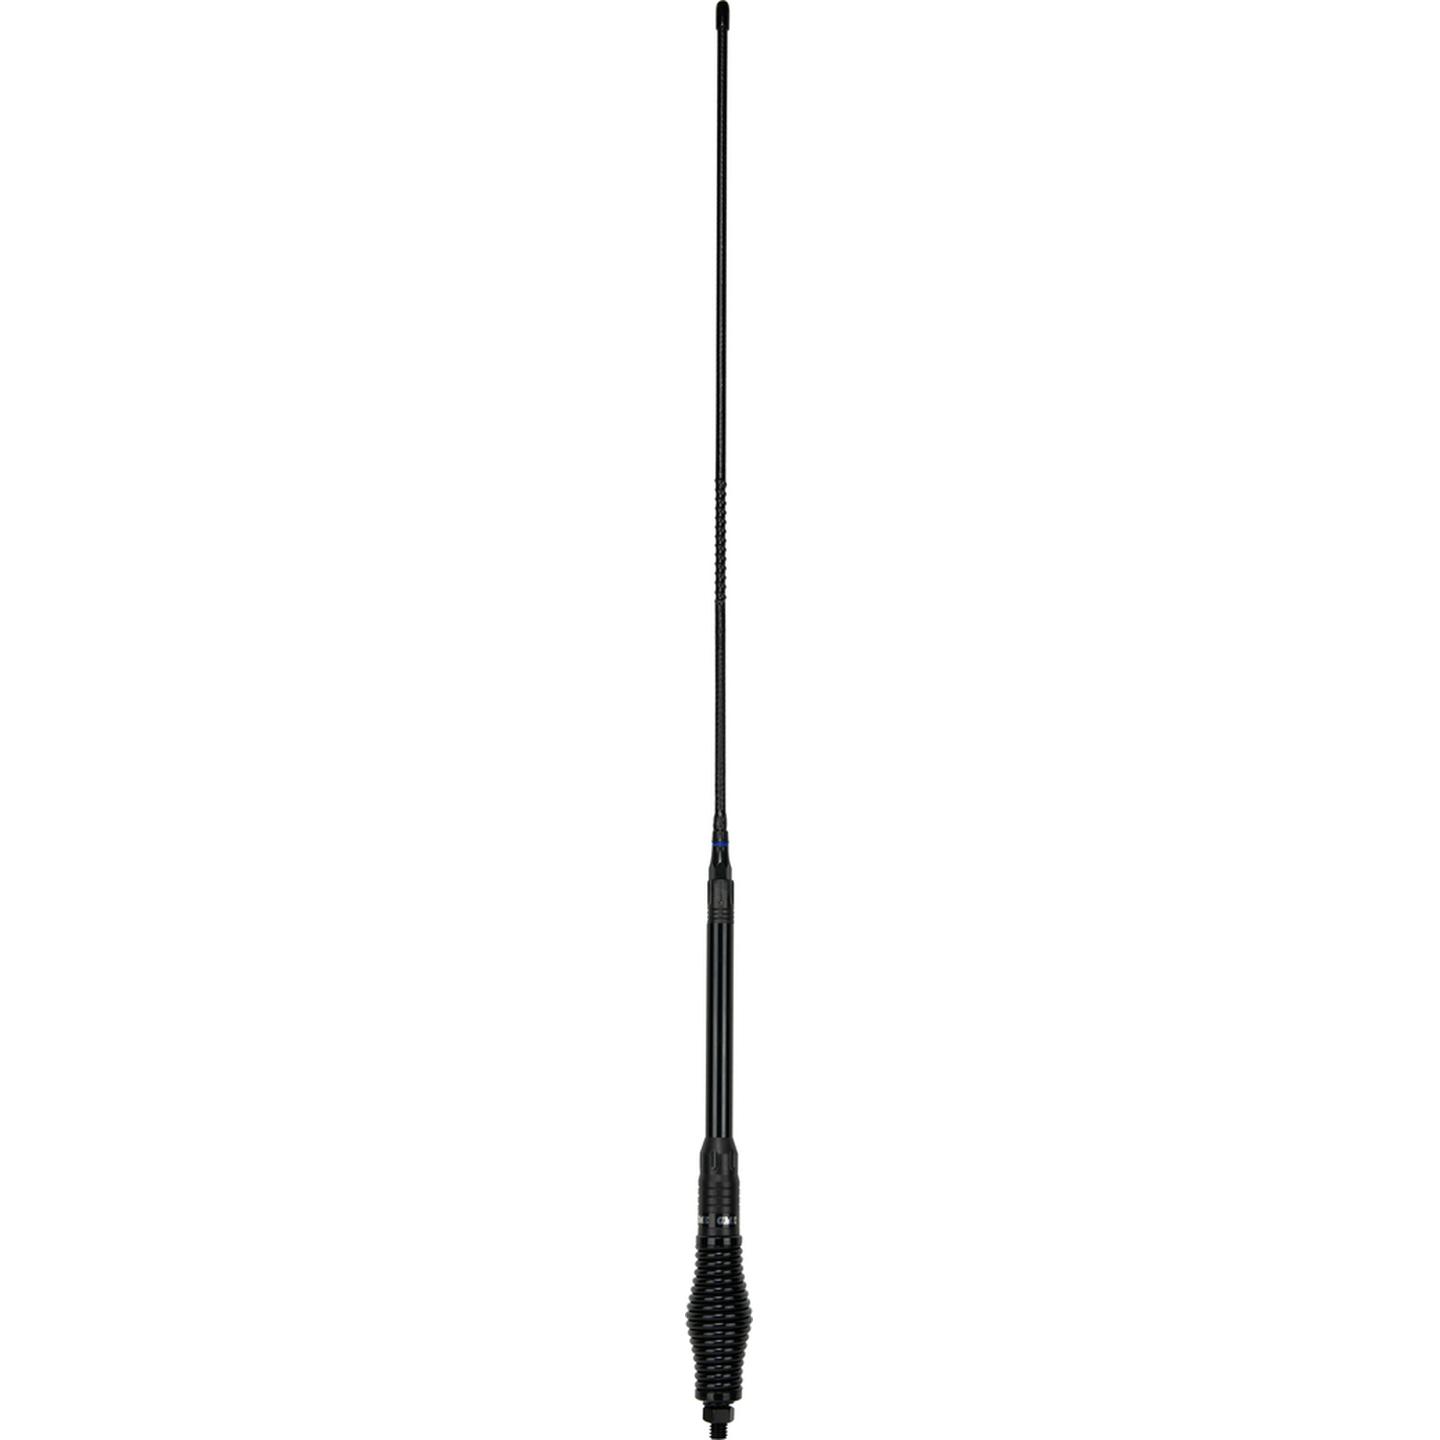 GME 640mm Elevated Feed Base AS002B Spring Fibreglass Colinear Antenna 6.6dBi Gain - Black